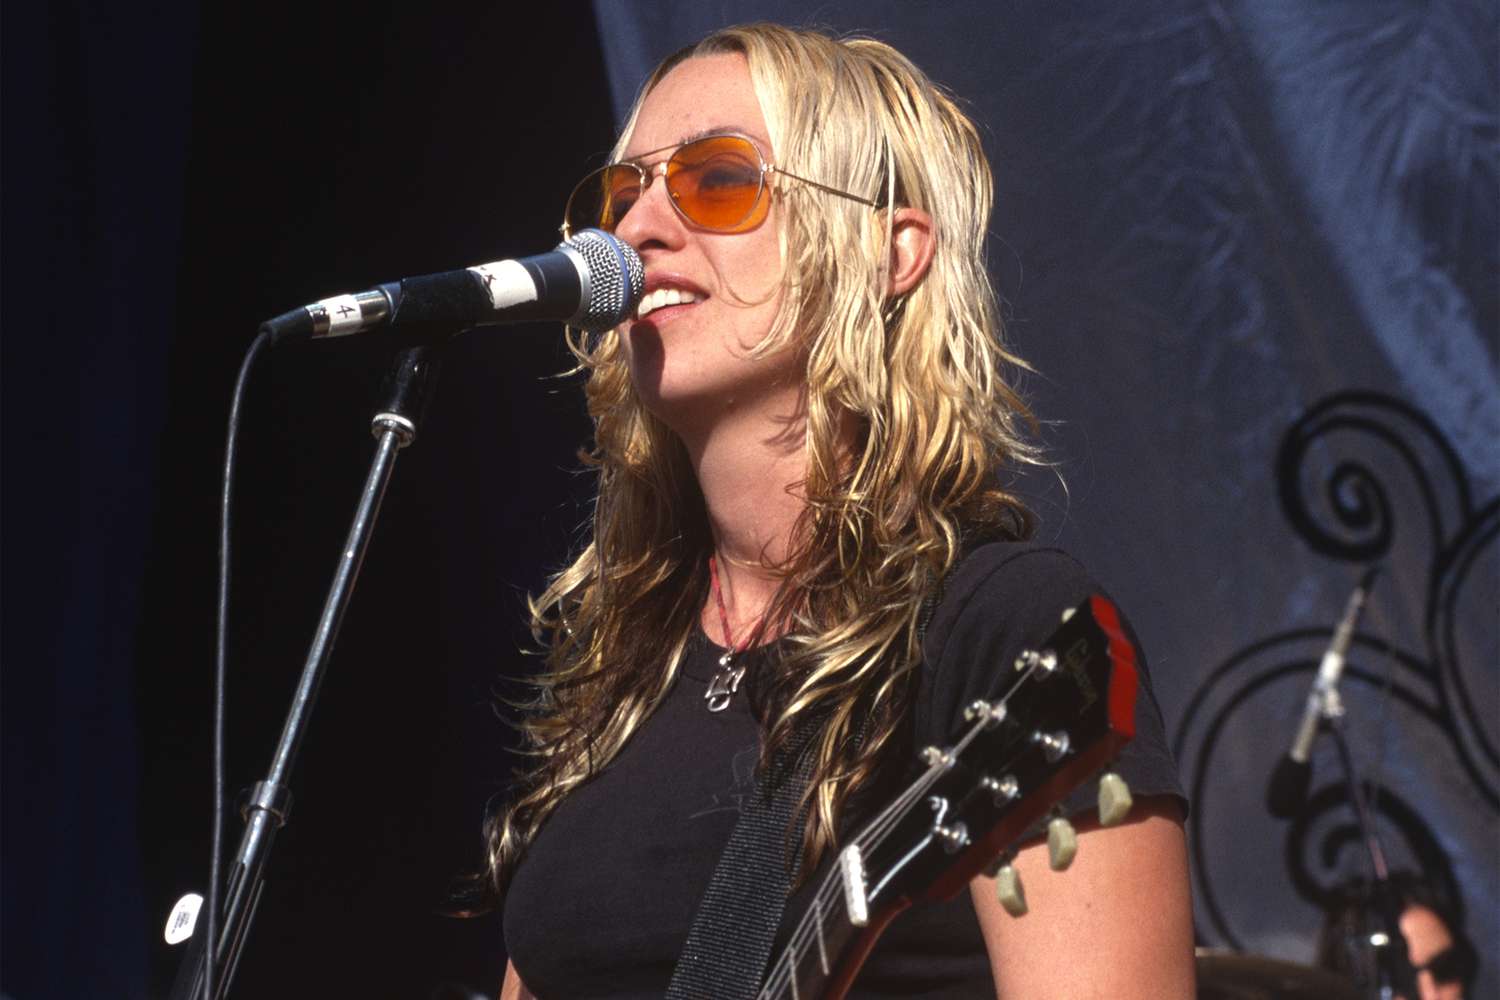 Vivian Trimble of Luscious Jackson performs during the Lilith Fair at Shoreline Amphitheatre on July 14, 1999 in Mountain View, California